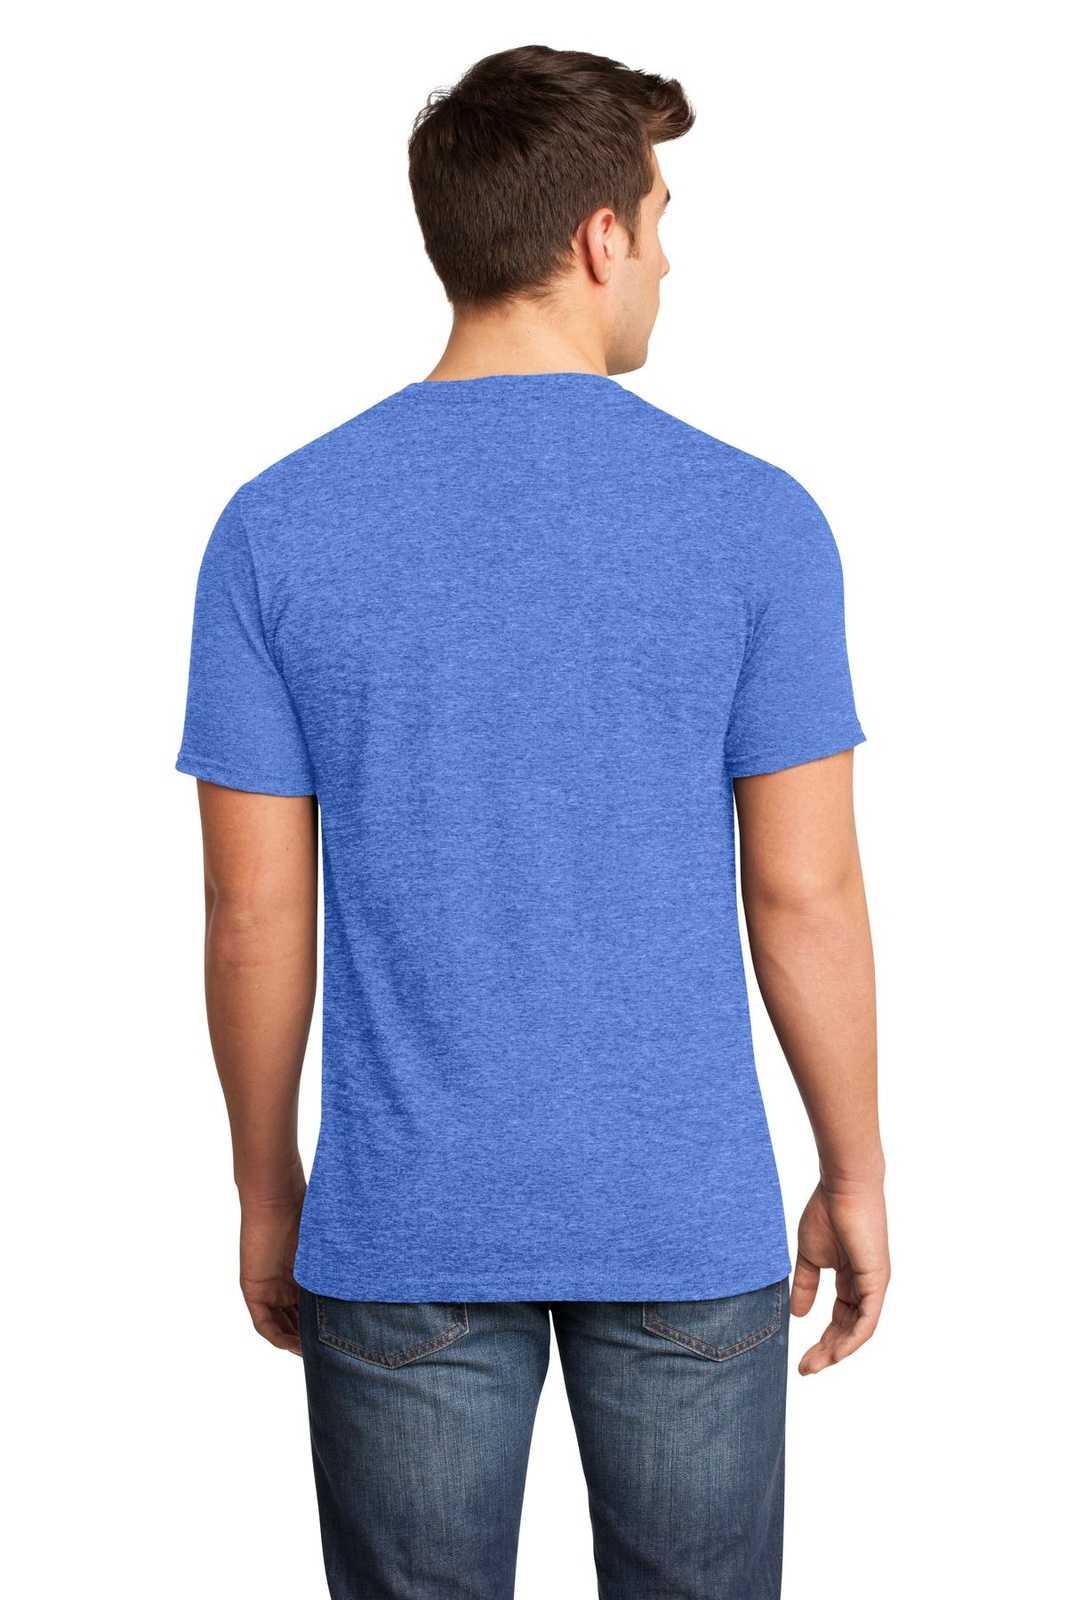 District DT6500 Very Important Tee V-Neck - Heathered Royal - HIT a Double - 2